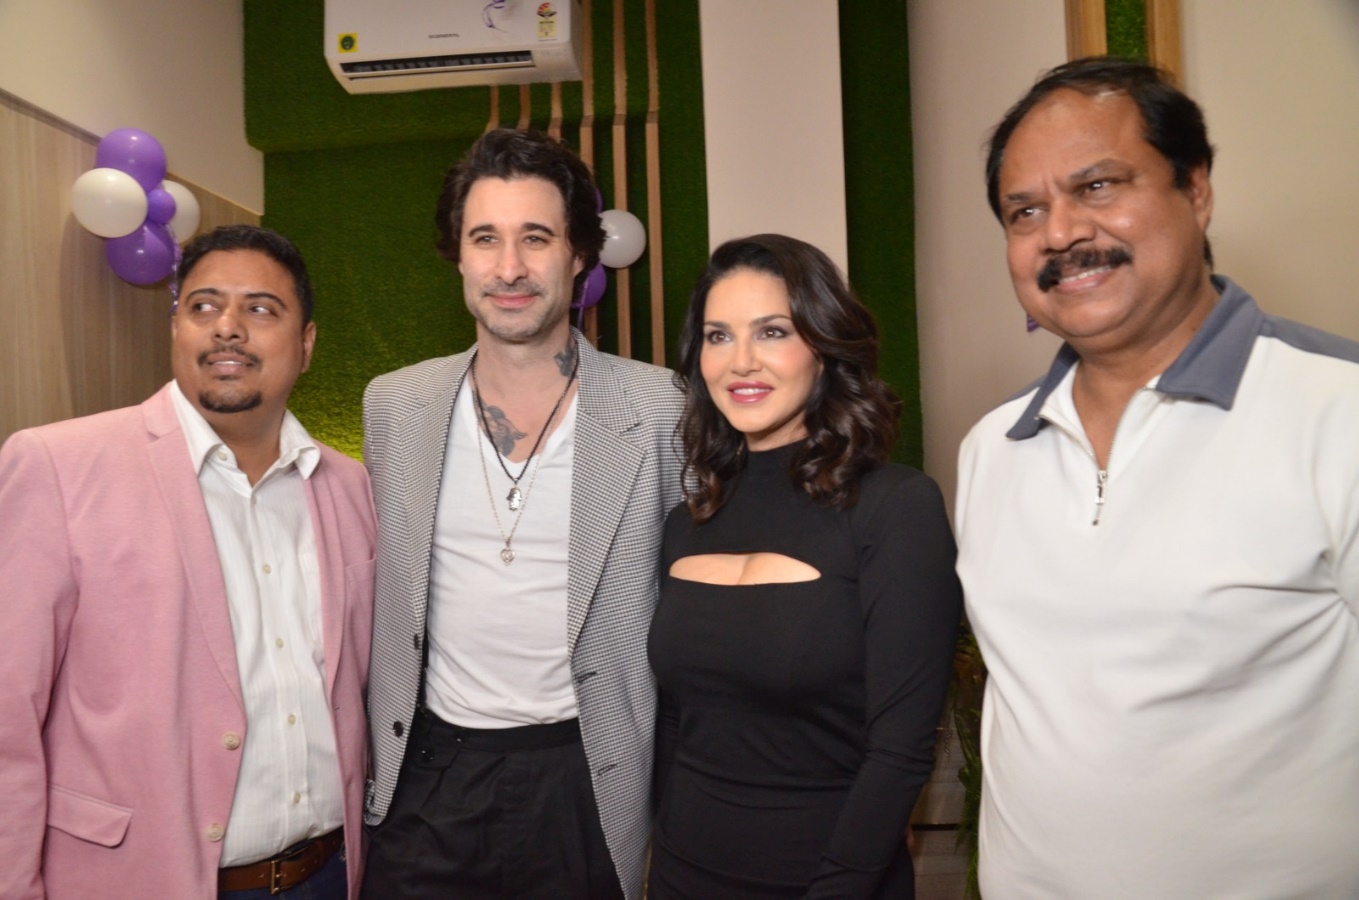 Sunny Leone stands up for ‘Beauty without Cruelty’ with Naturals Beauty Academy-Starstruck by Sunny Leone collab: launches Naturals Borivali outlet